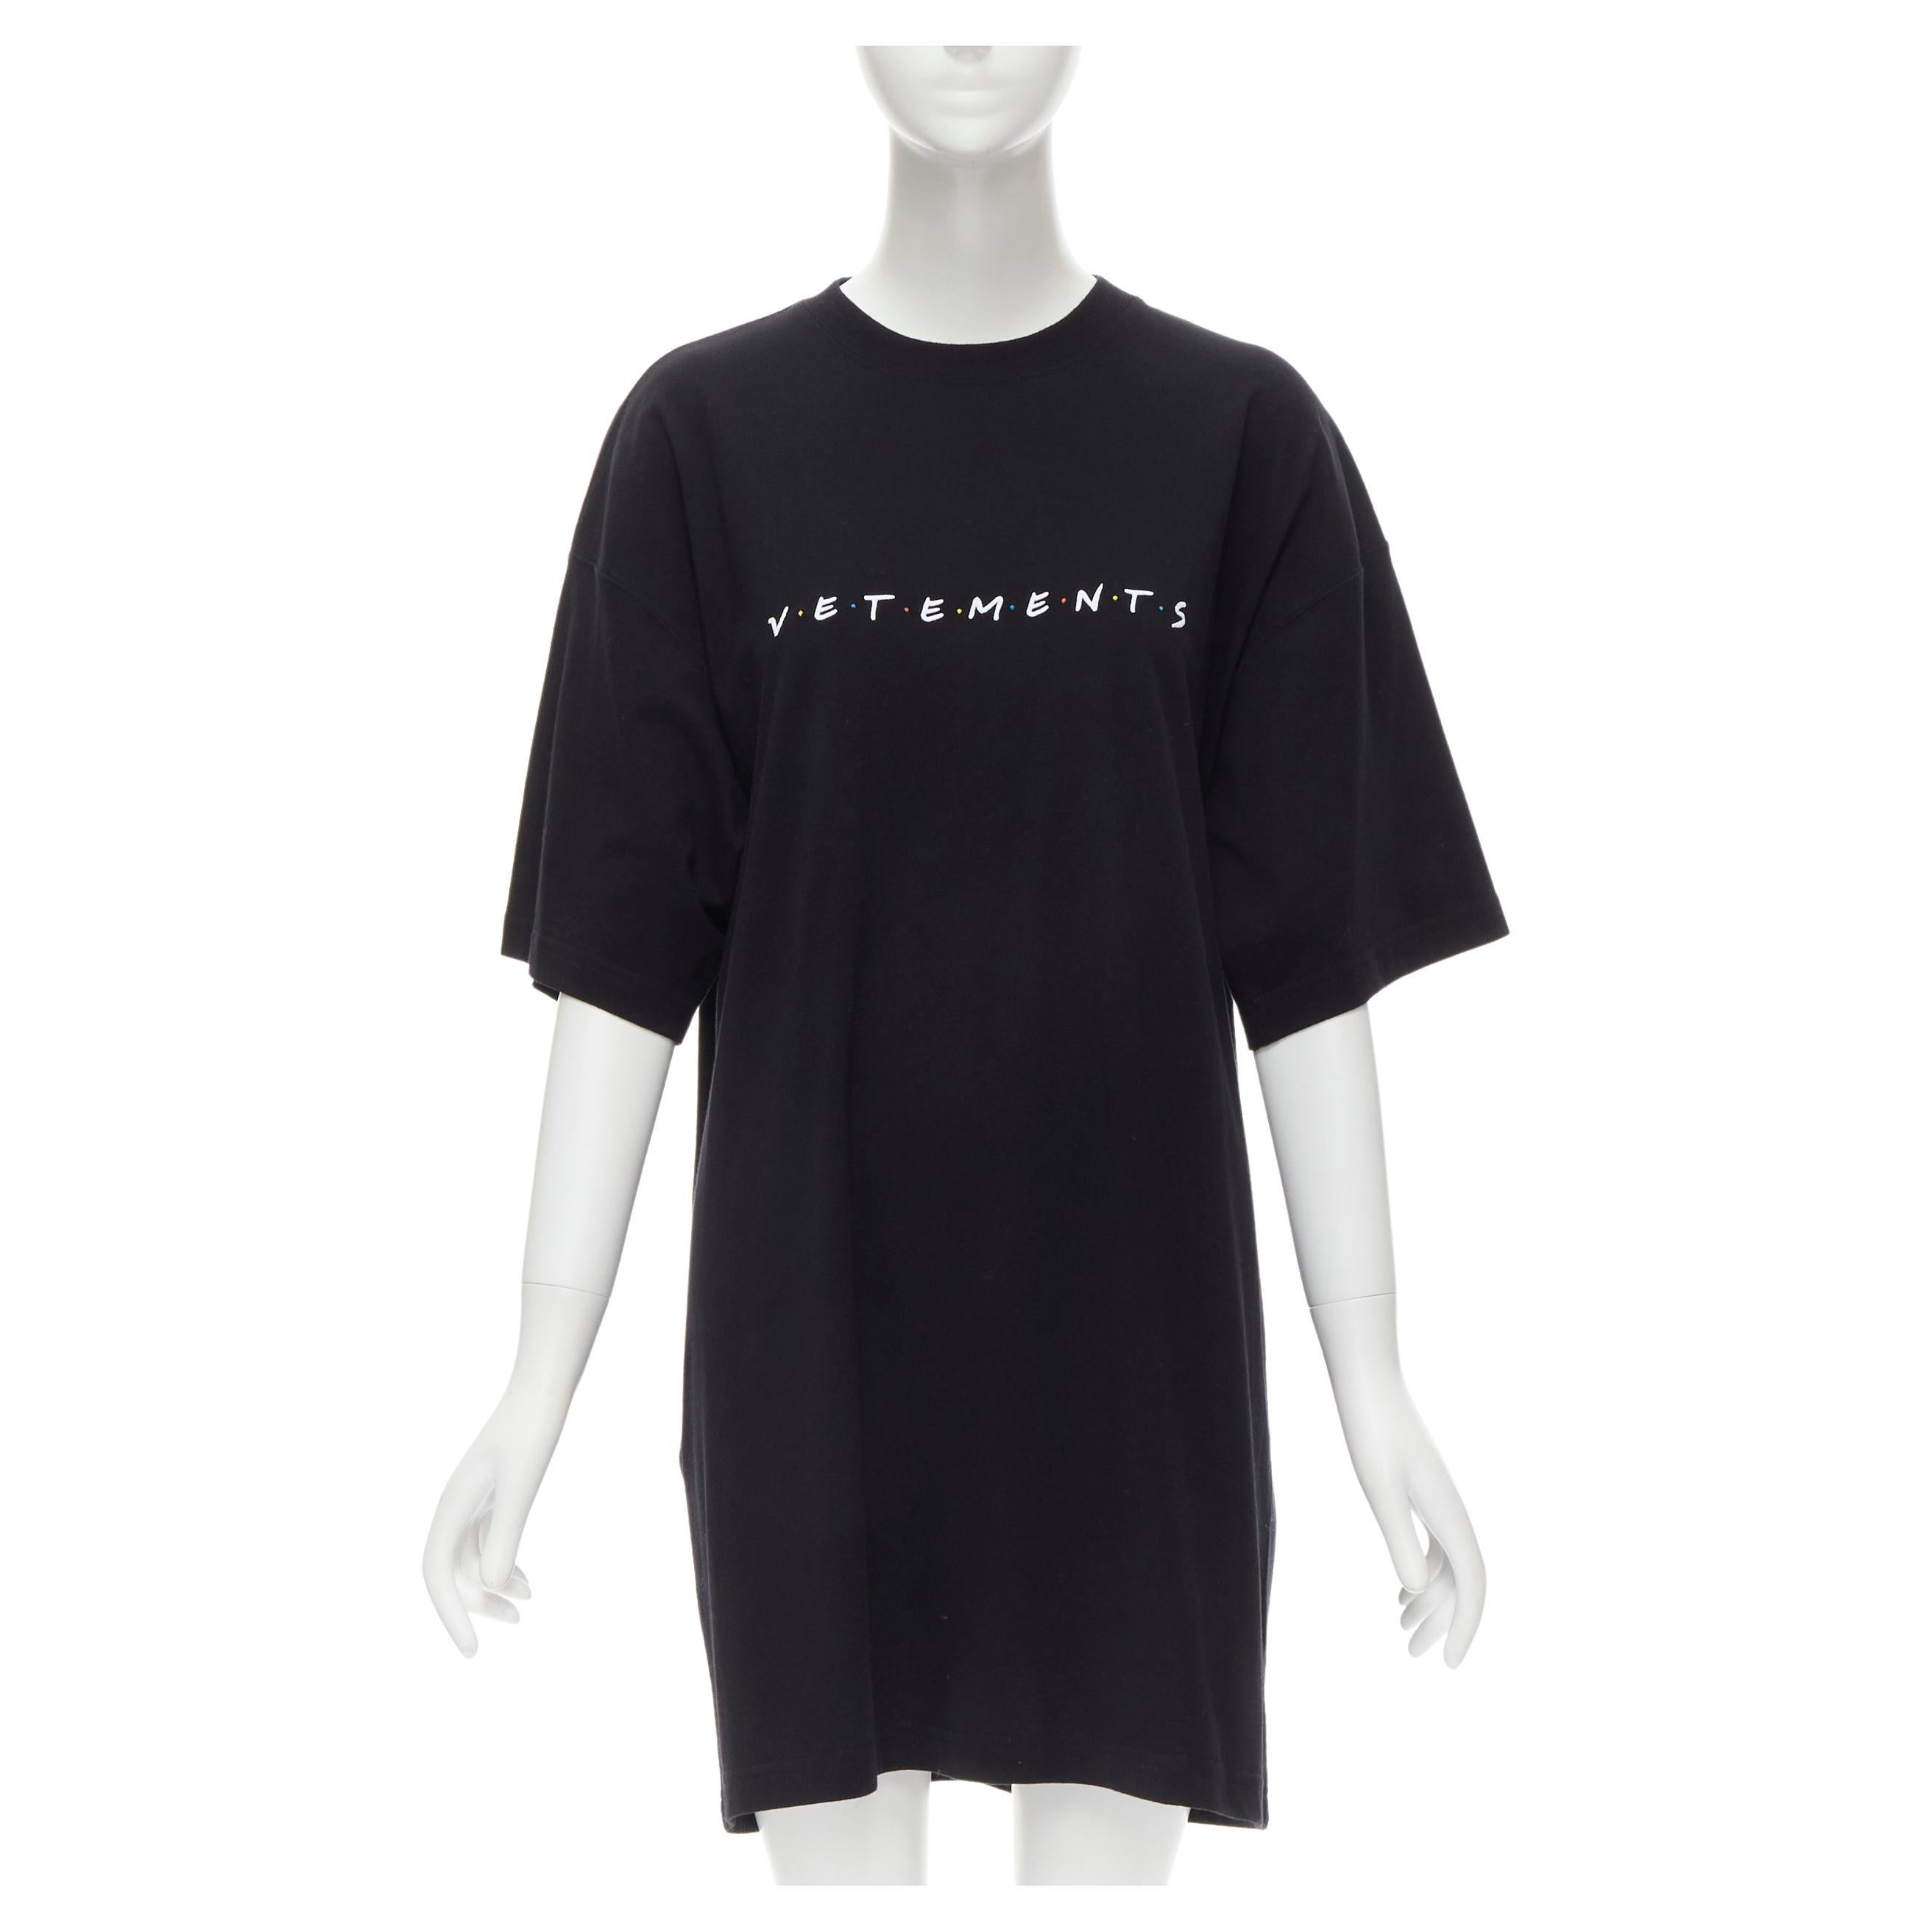 VETEMENTS Friends logo embroidered Limited Edition black cotton unisex long  For Sale